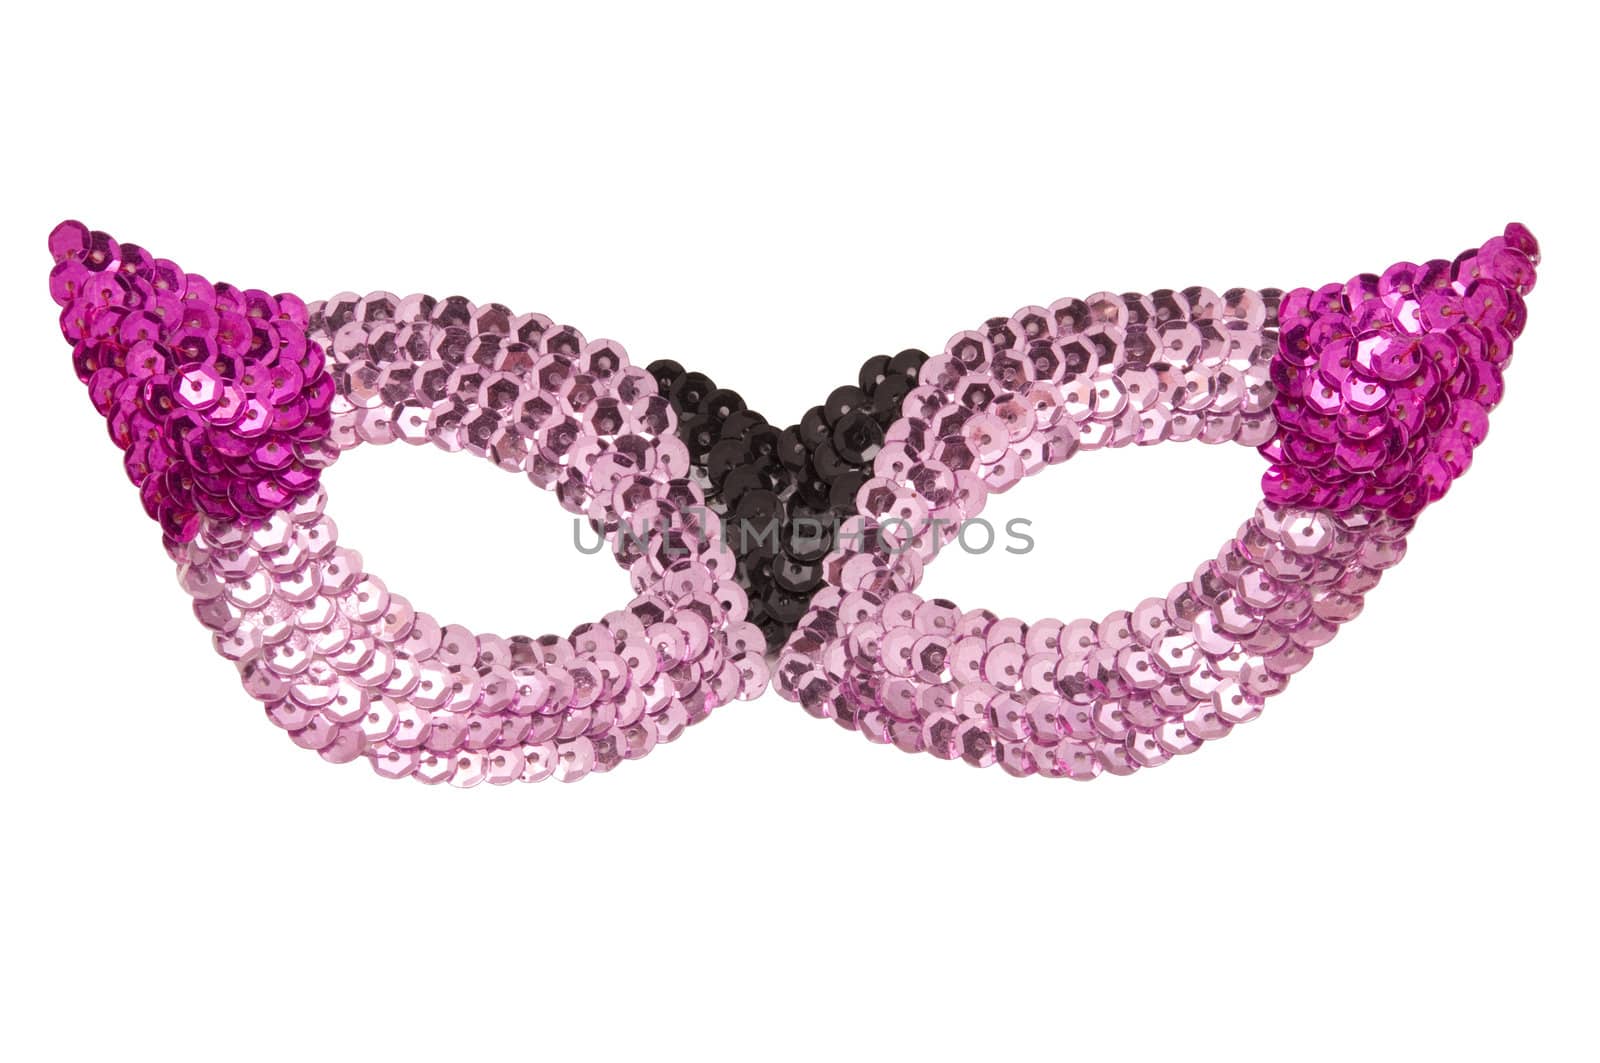 Sequined pink and purple party mask against white